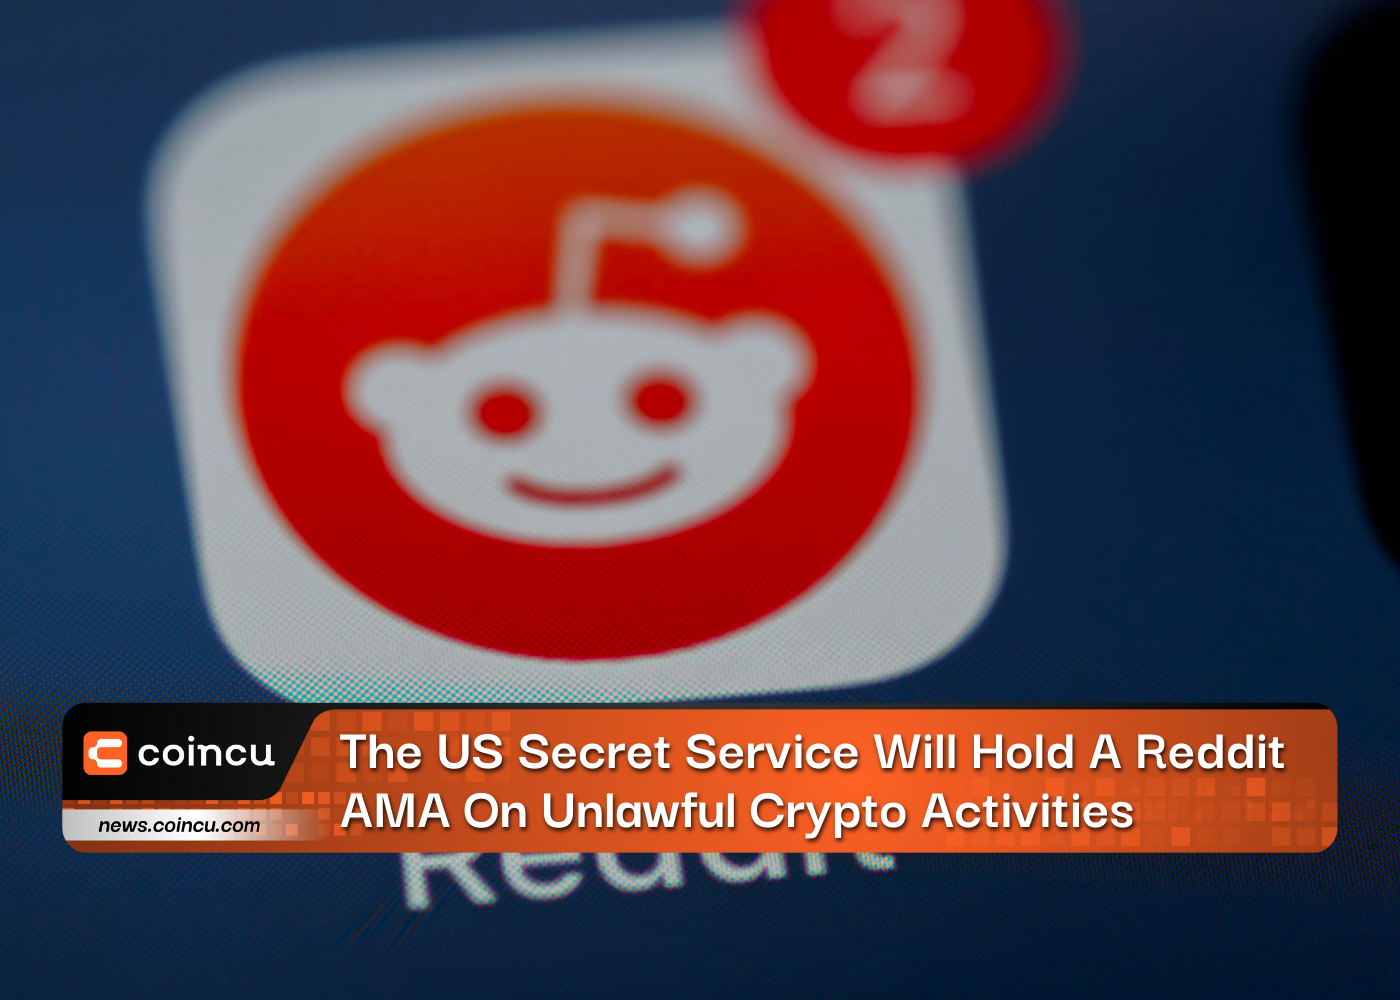 The US Secret Service Will Hold A Reddit AMA On Unlawful Crypto Activities